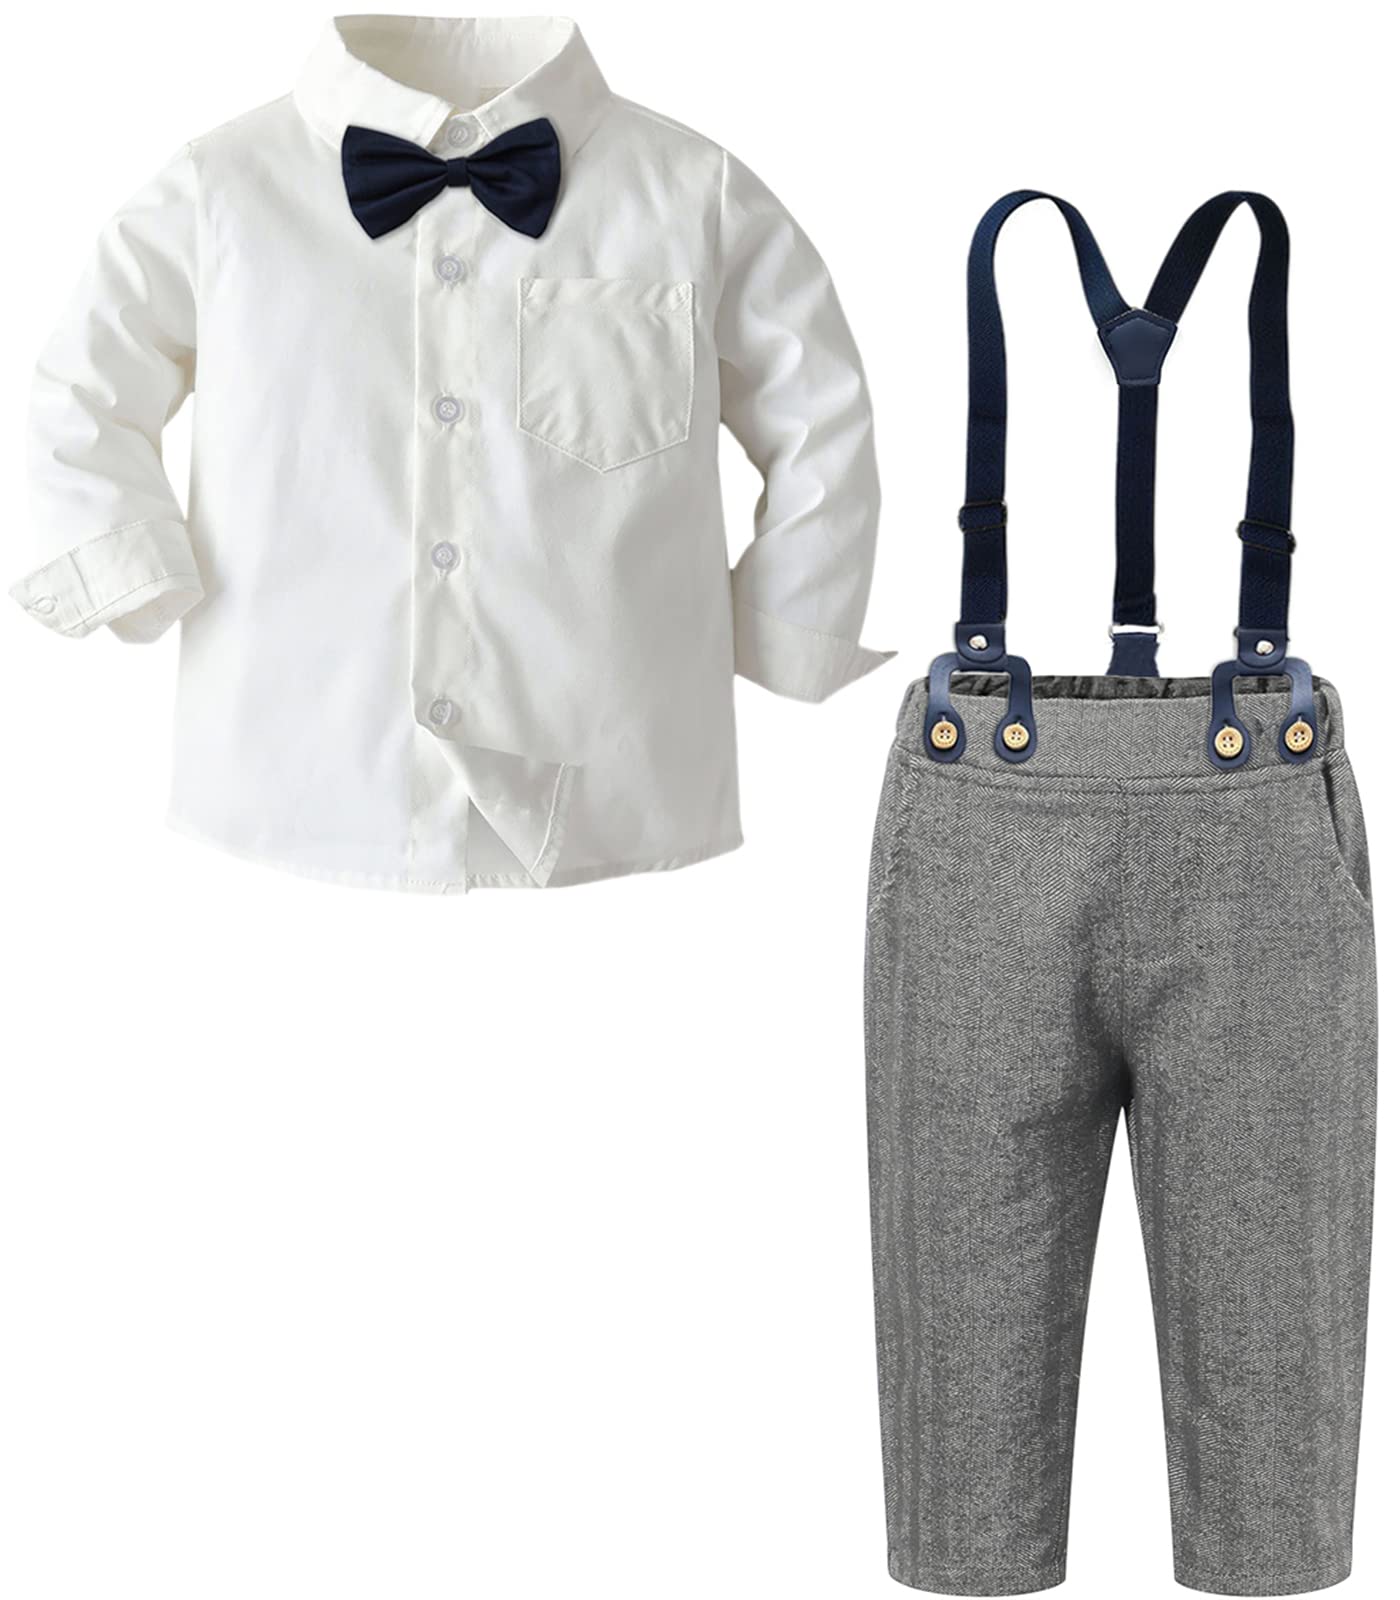 SANGTREE Boys Formal Clothes, Long Sleeves Button Down Dress Shirt with Bow Tie + Suspender Pants Set Gentleman Suits Outfit Kid